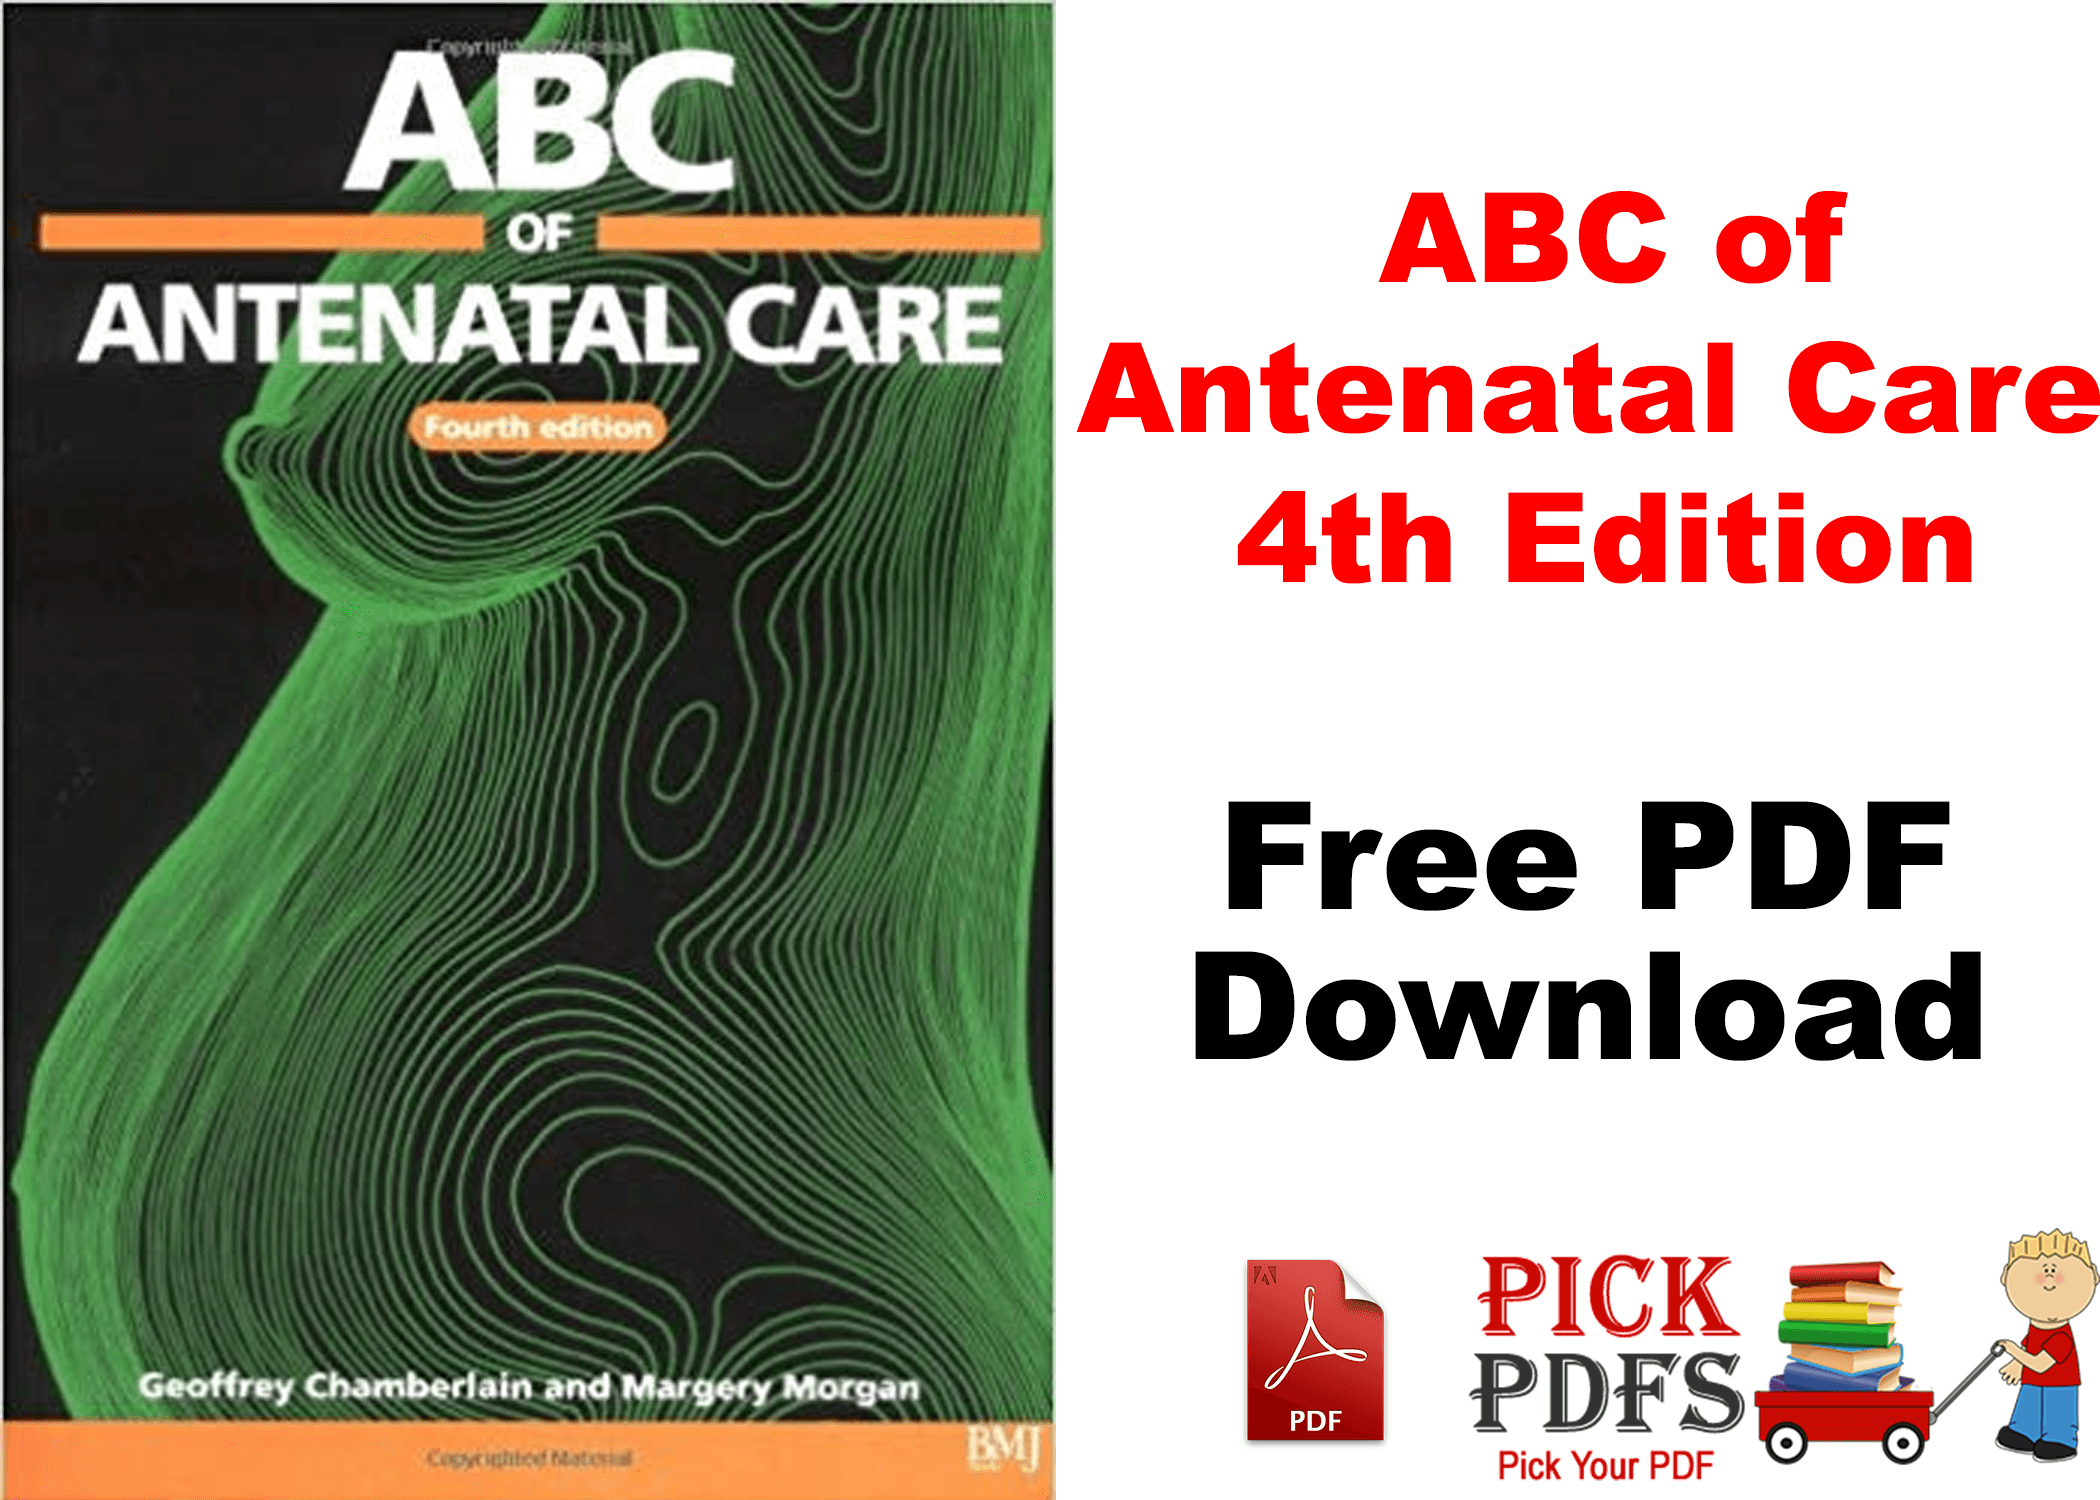 https://pickpdfs.com/abc-of-antenatal-care-pdf-4th-edition-free-download-direct-link/